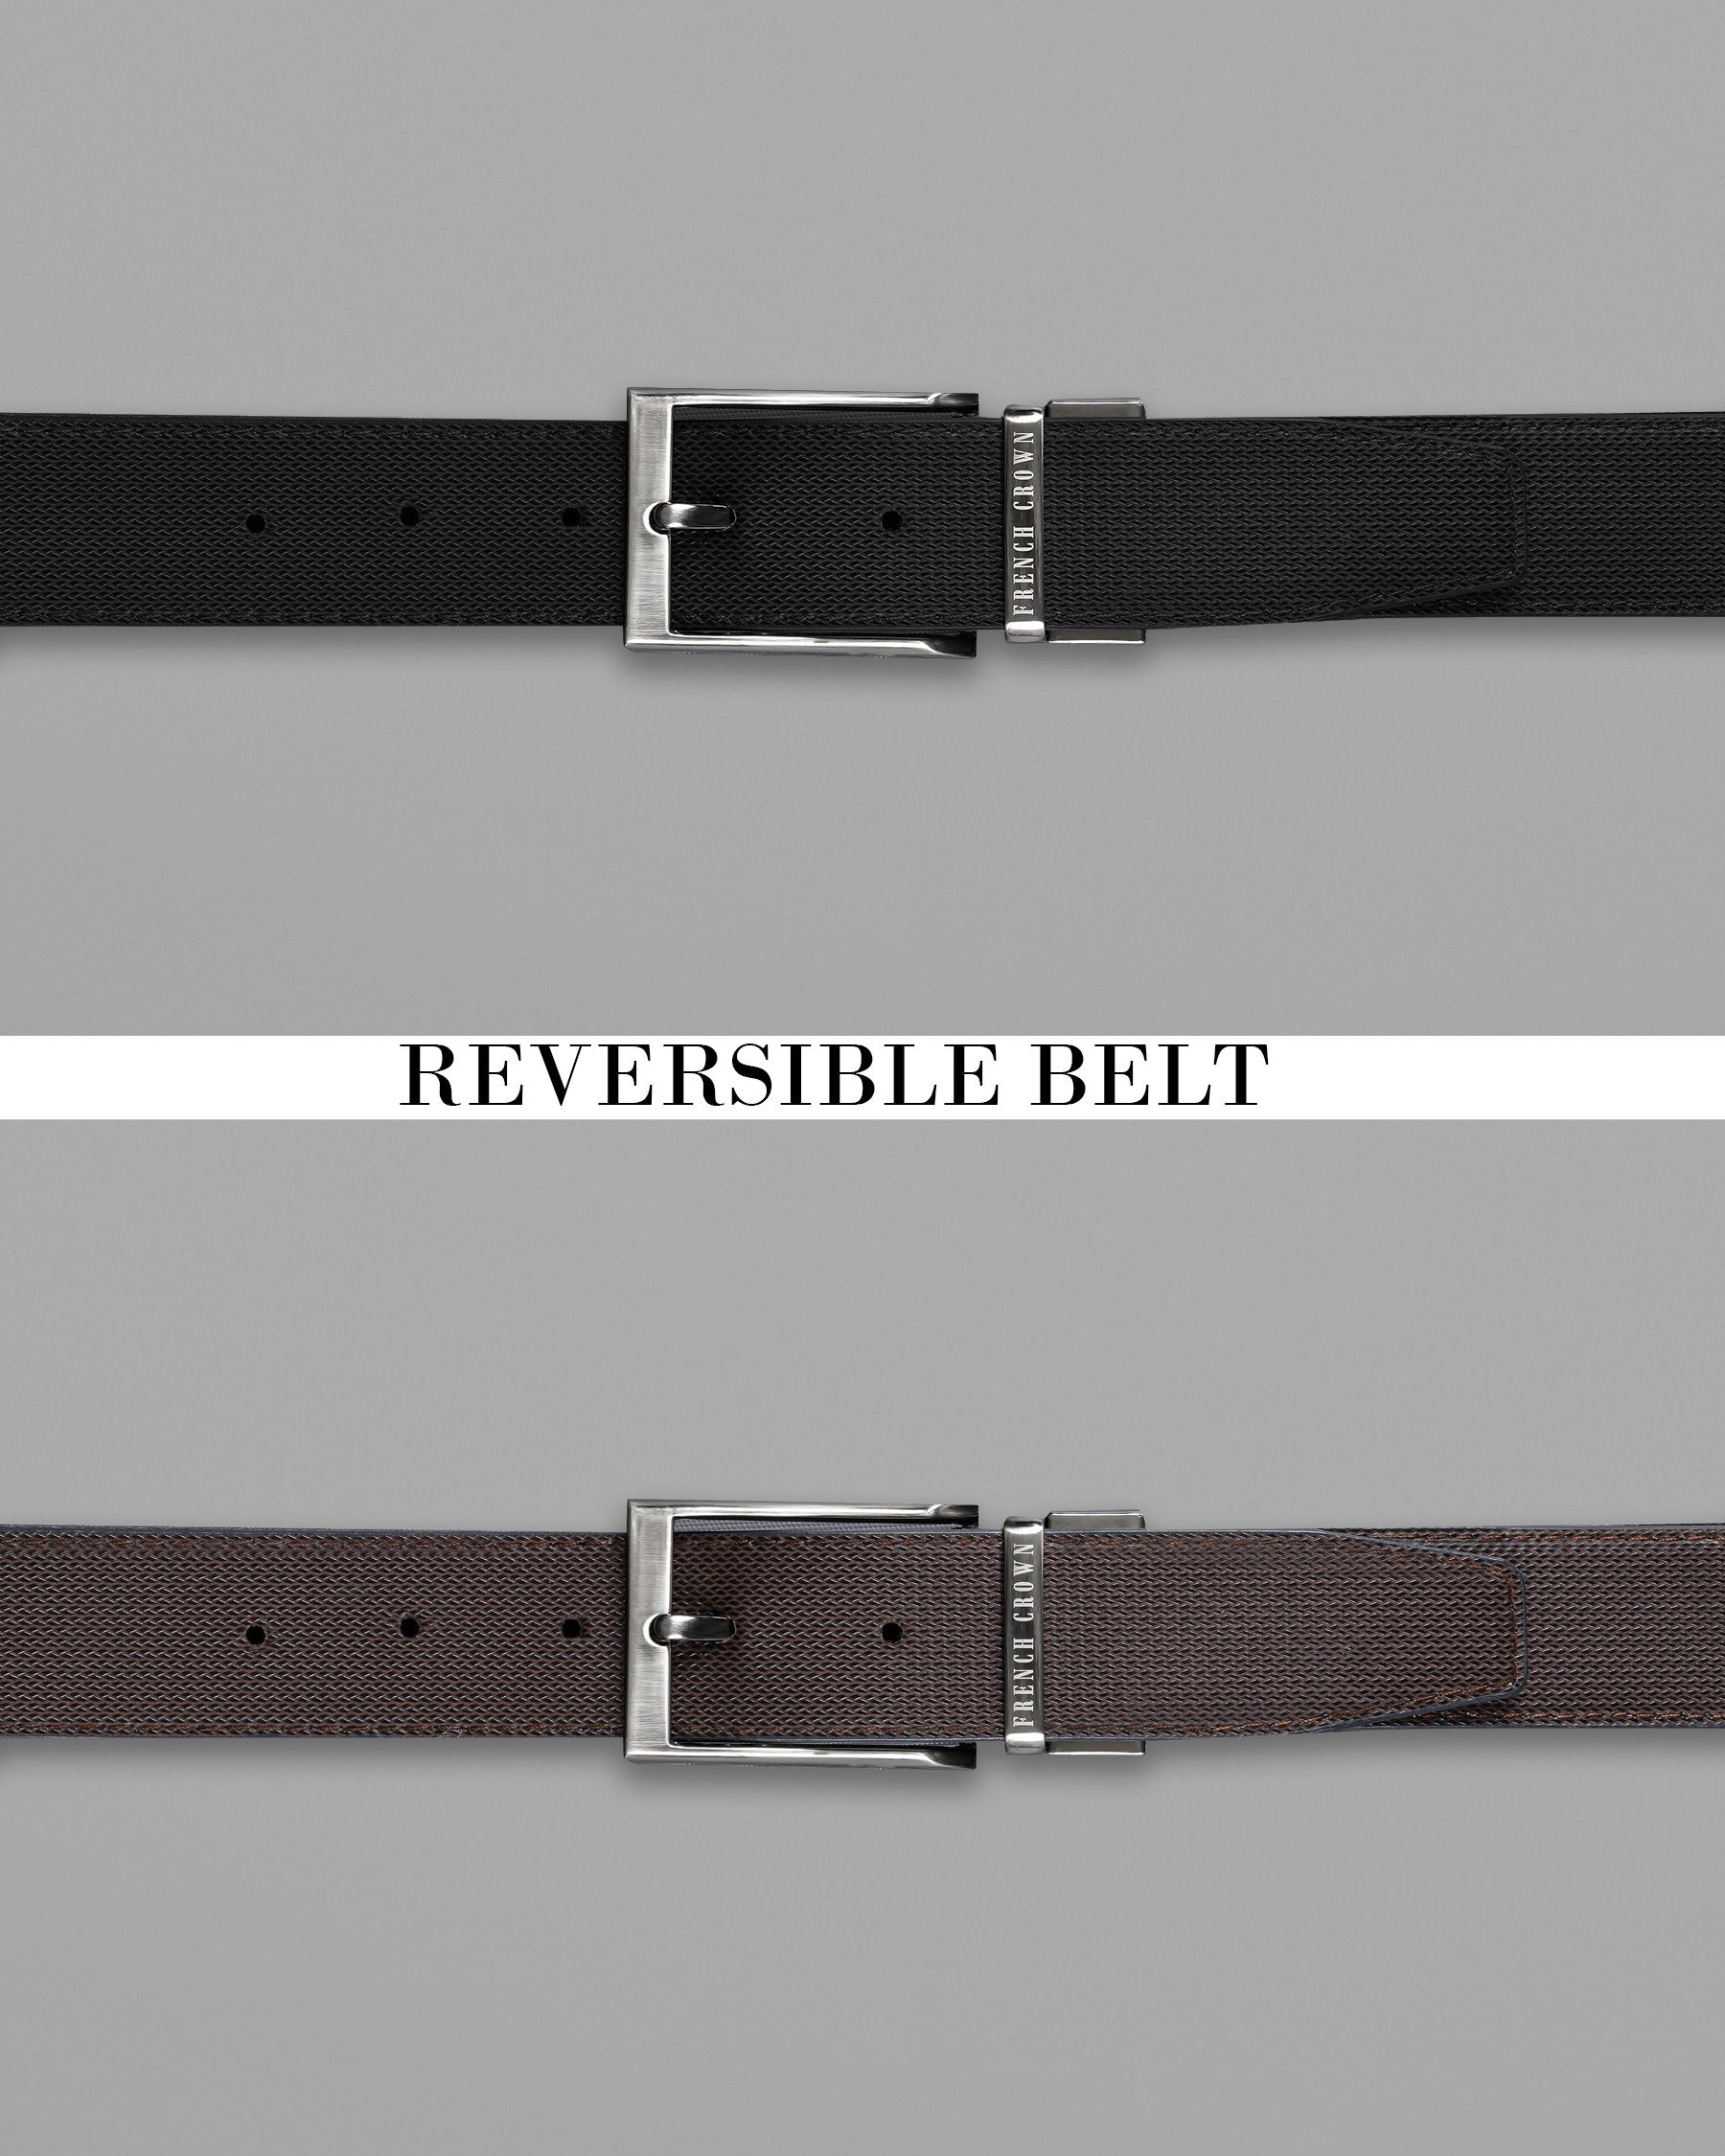 Silver Metallic Shiny Buckle with Jade Black and Brown Leather Free Handcrafted Reversible Belt BT077-28, BT077-30, BT077-32, BT077-34, BT077-36, BT077-38